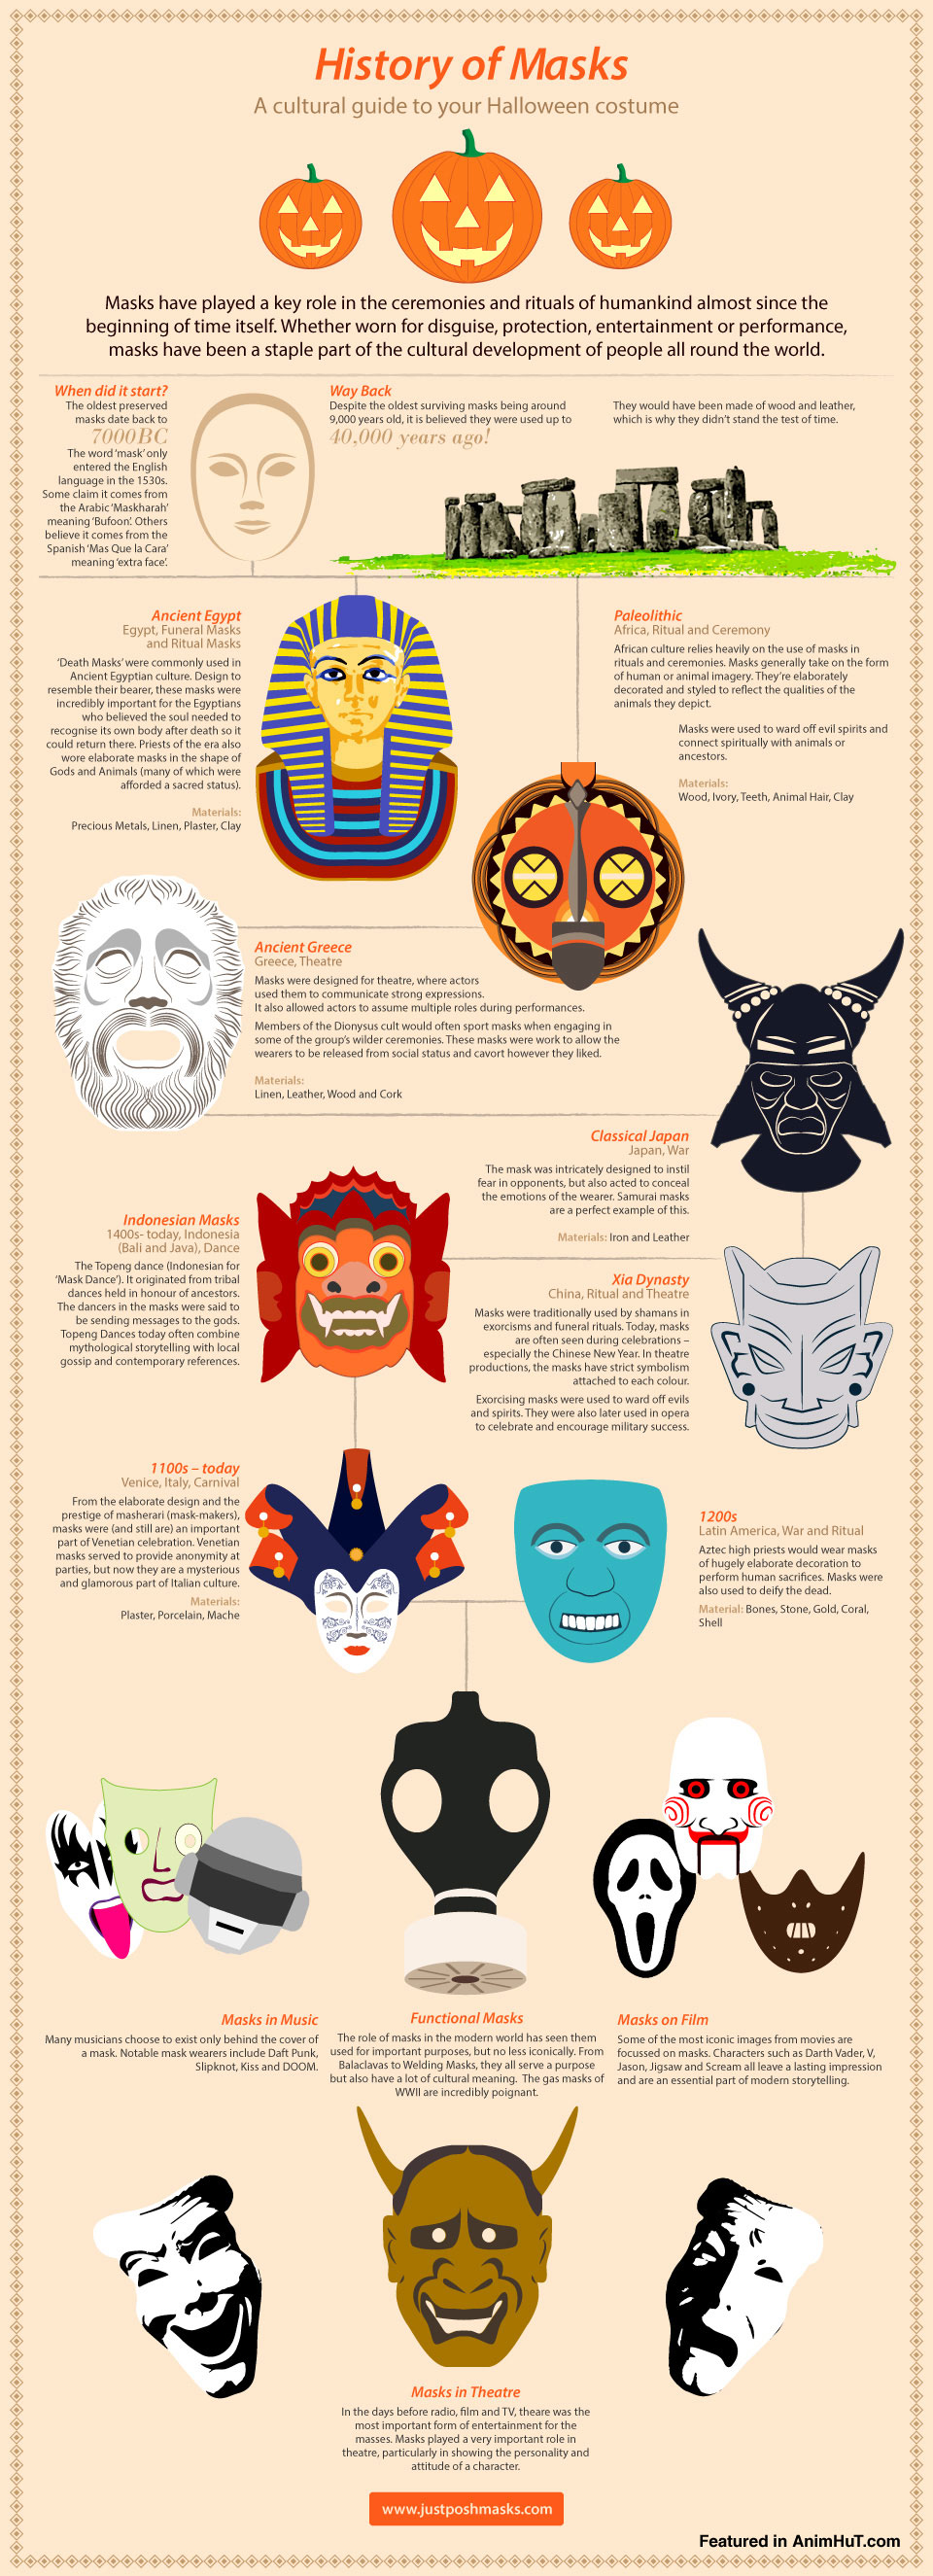 popular infographic on Halloween and Mask